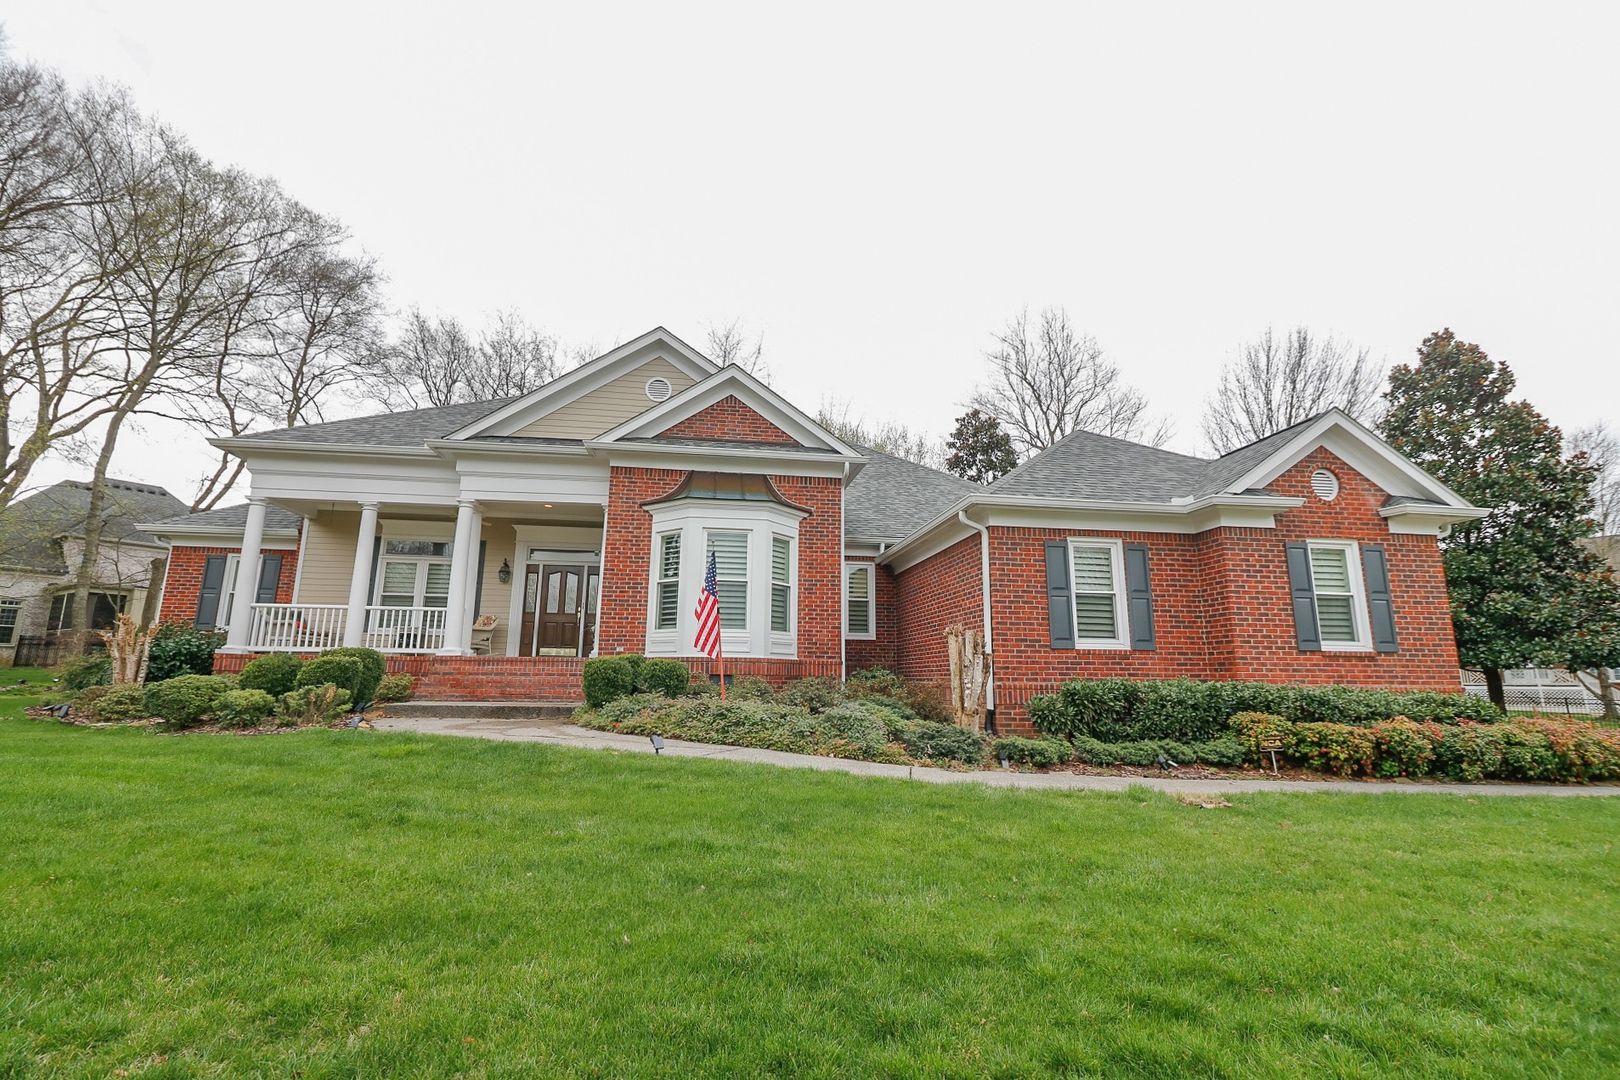 5 Bed, 3.5 Bath w/ 3 Car Garage Less than 1 Mile from Downtown Franklin